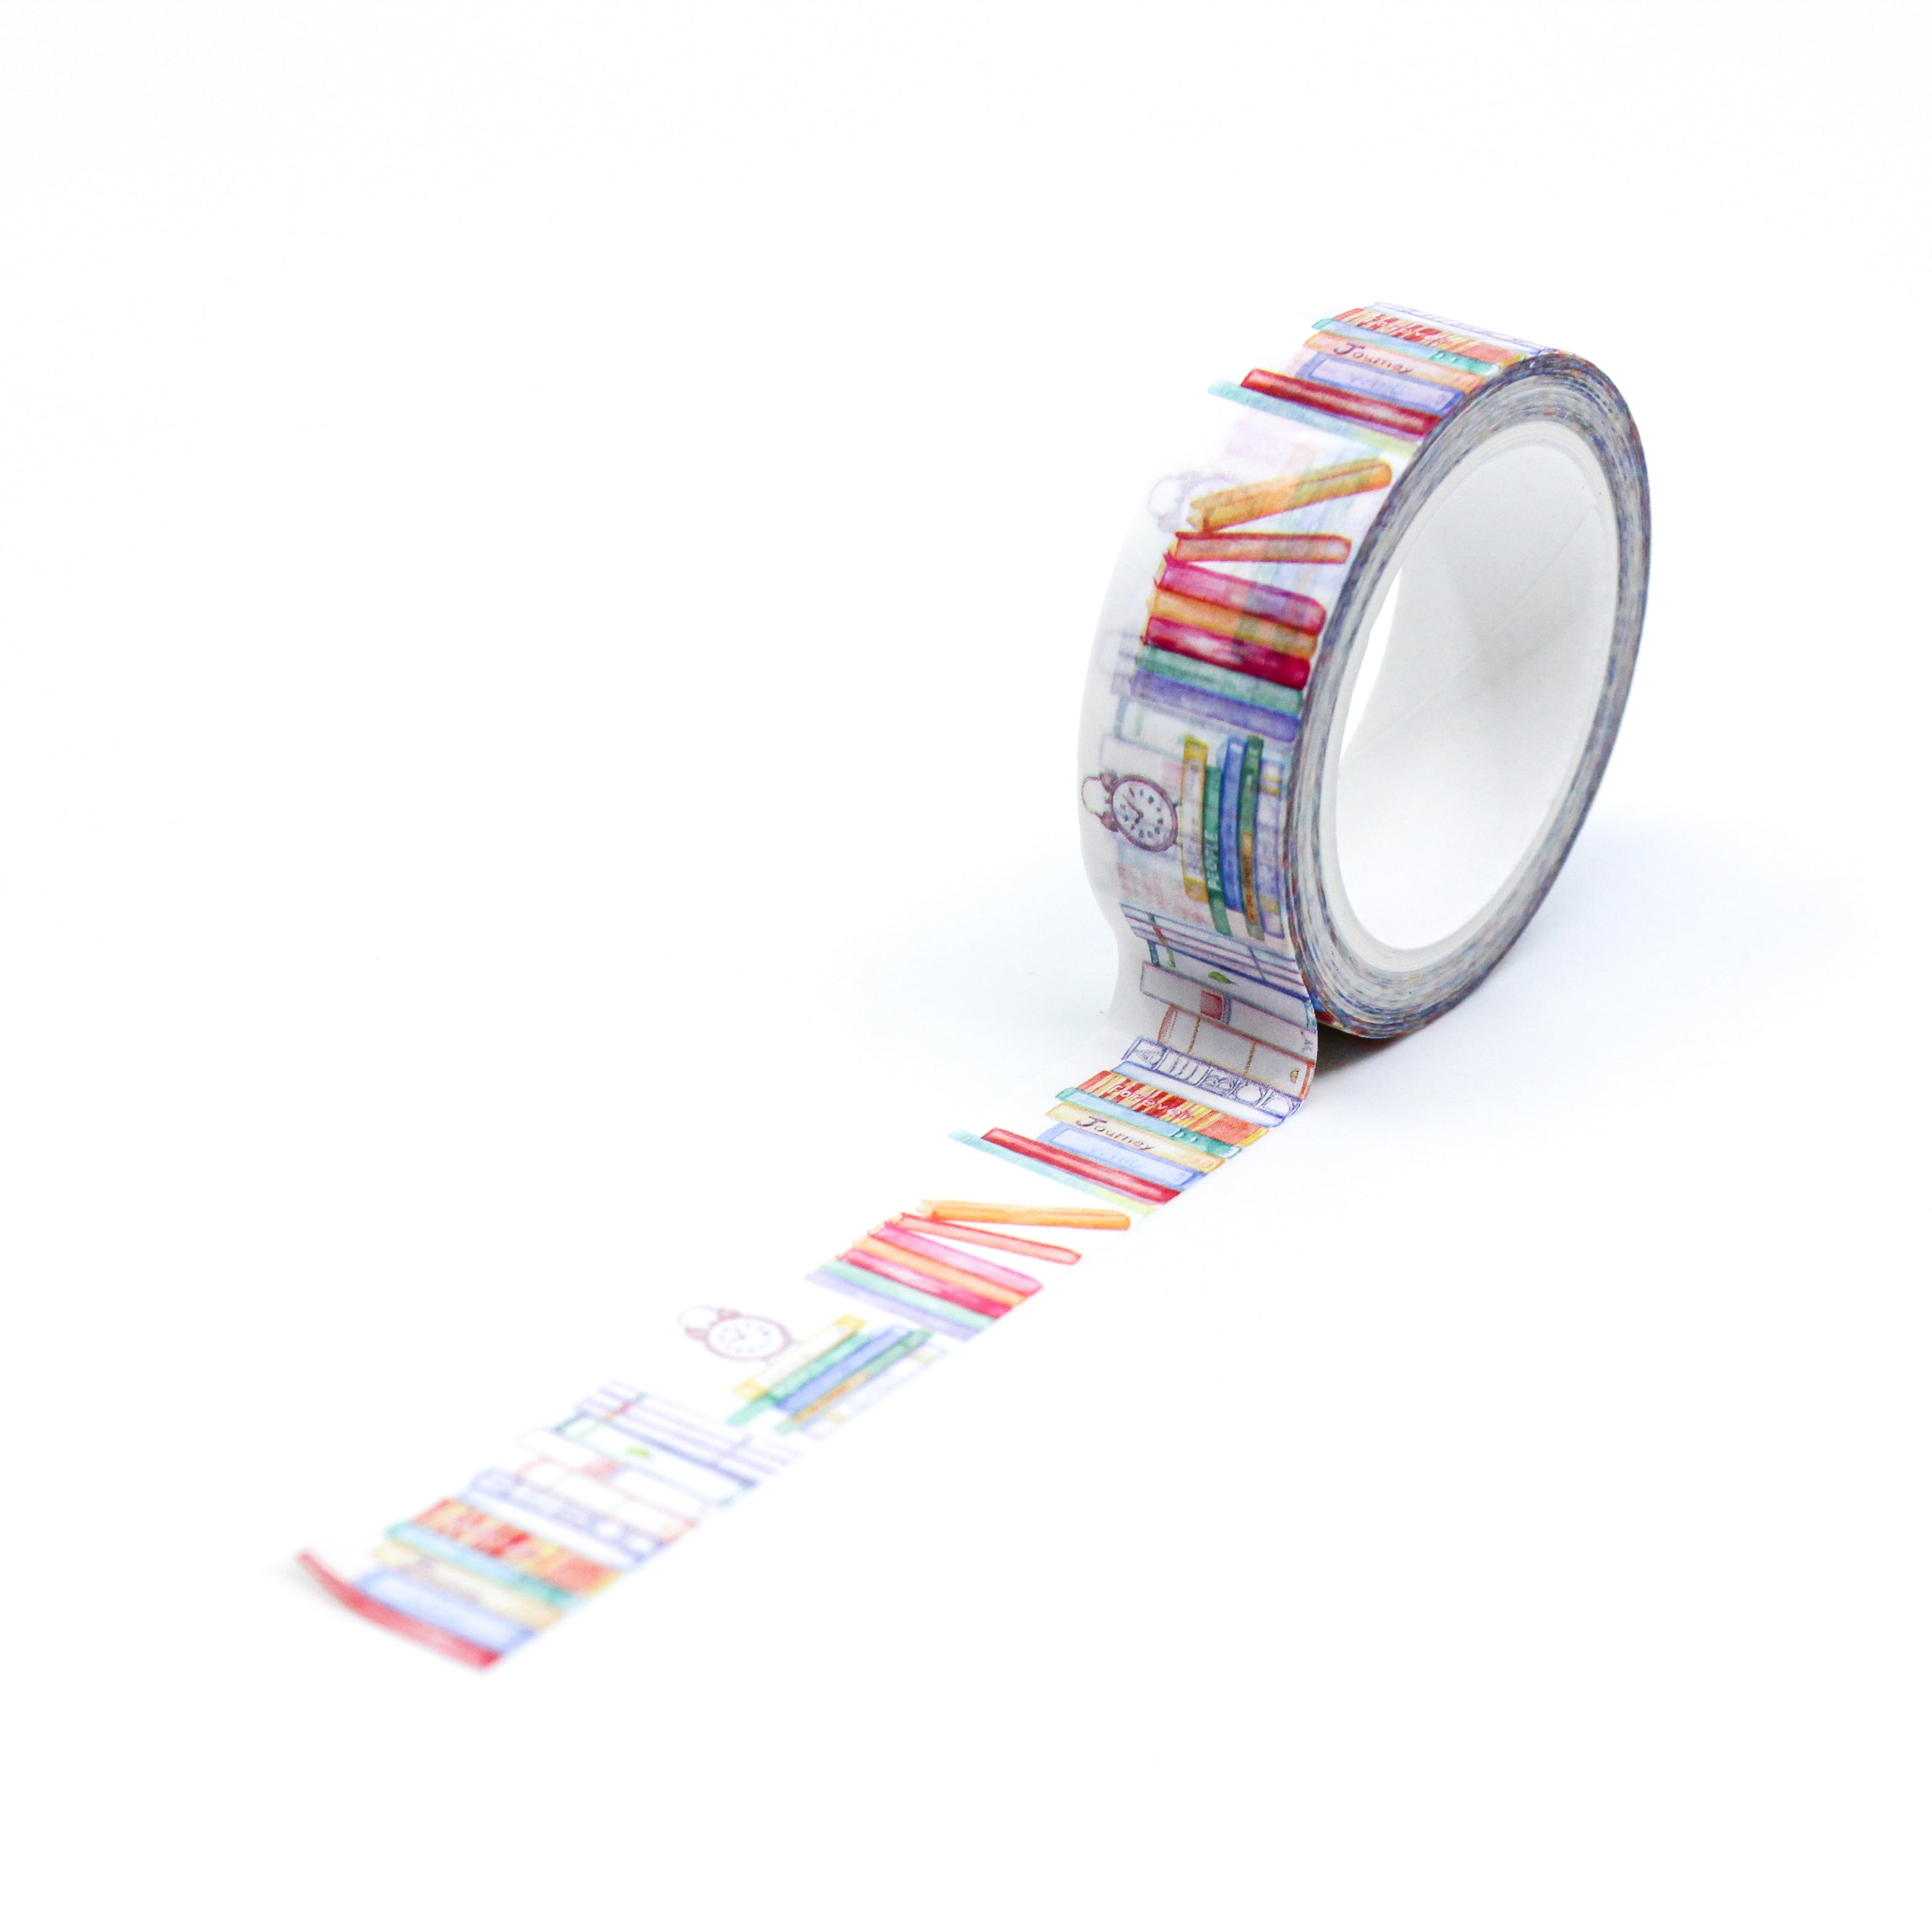 This is a full pattern repeat view of library bookshelf washi tape from BBB Supplies Craft Shop